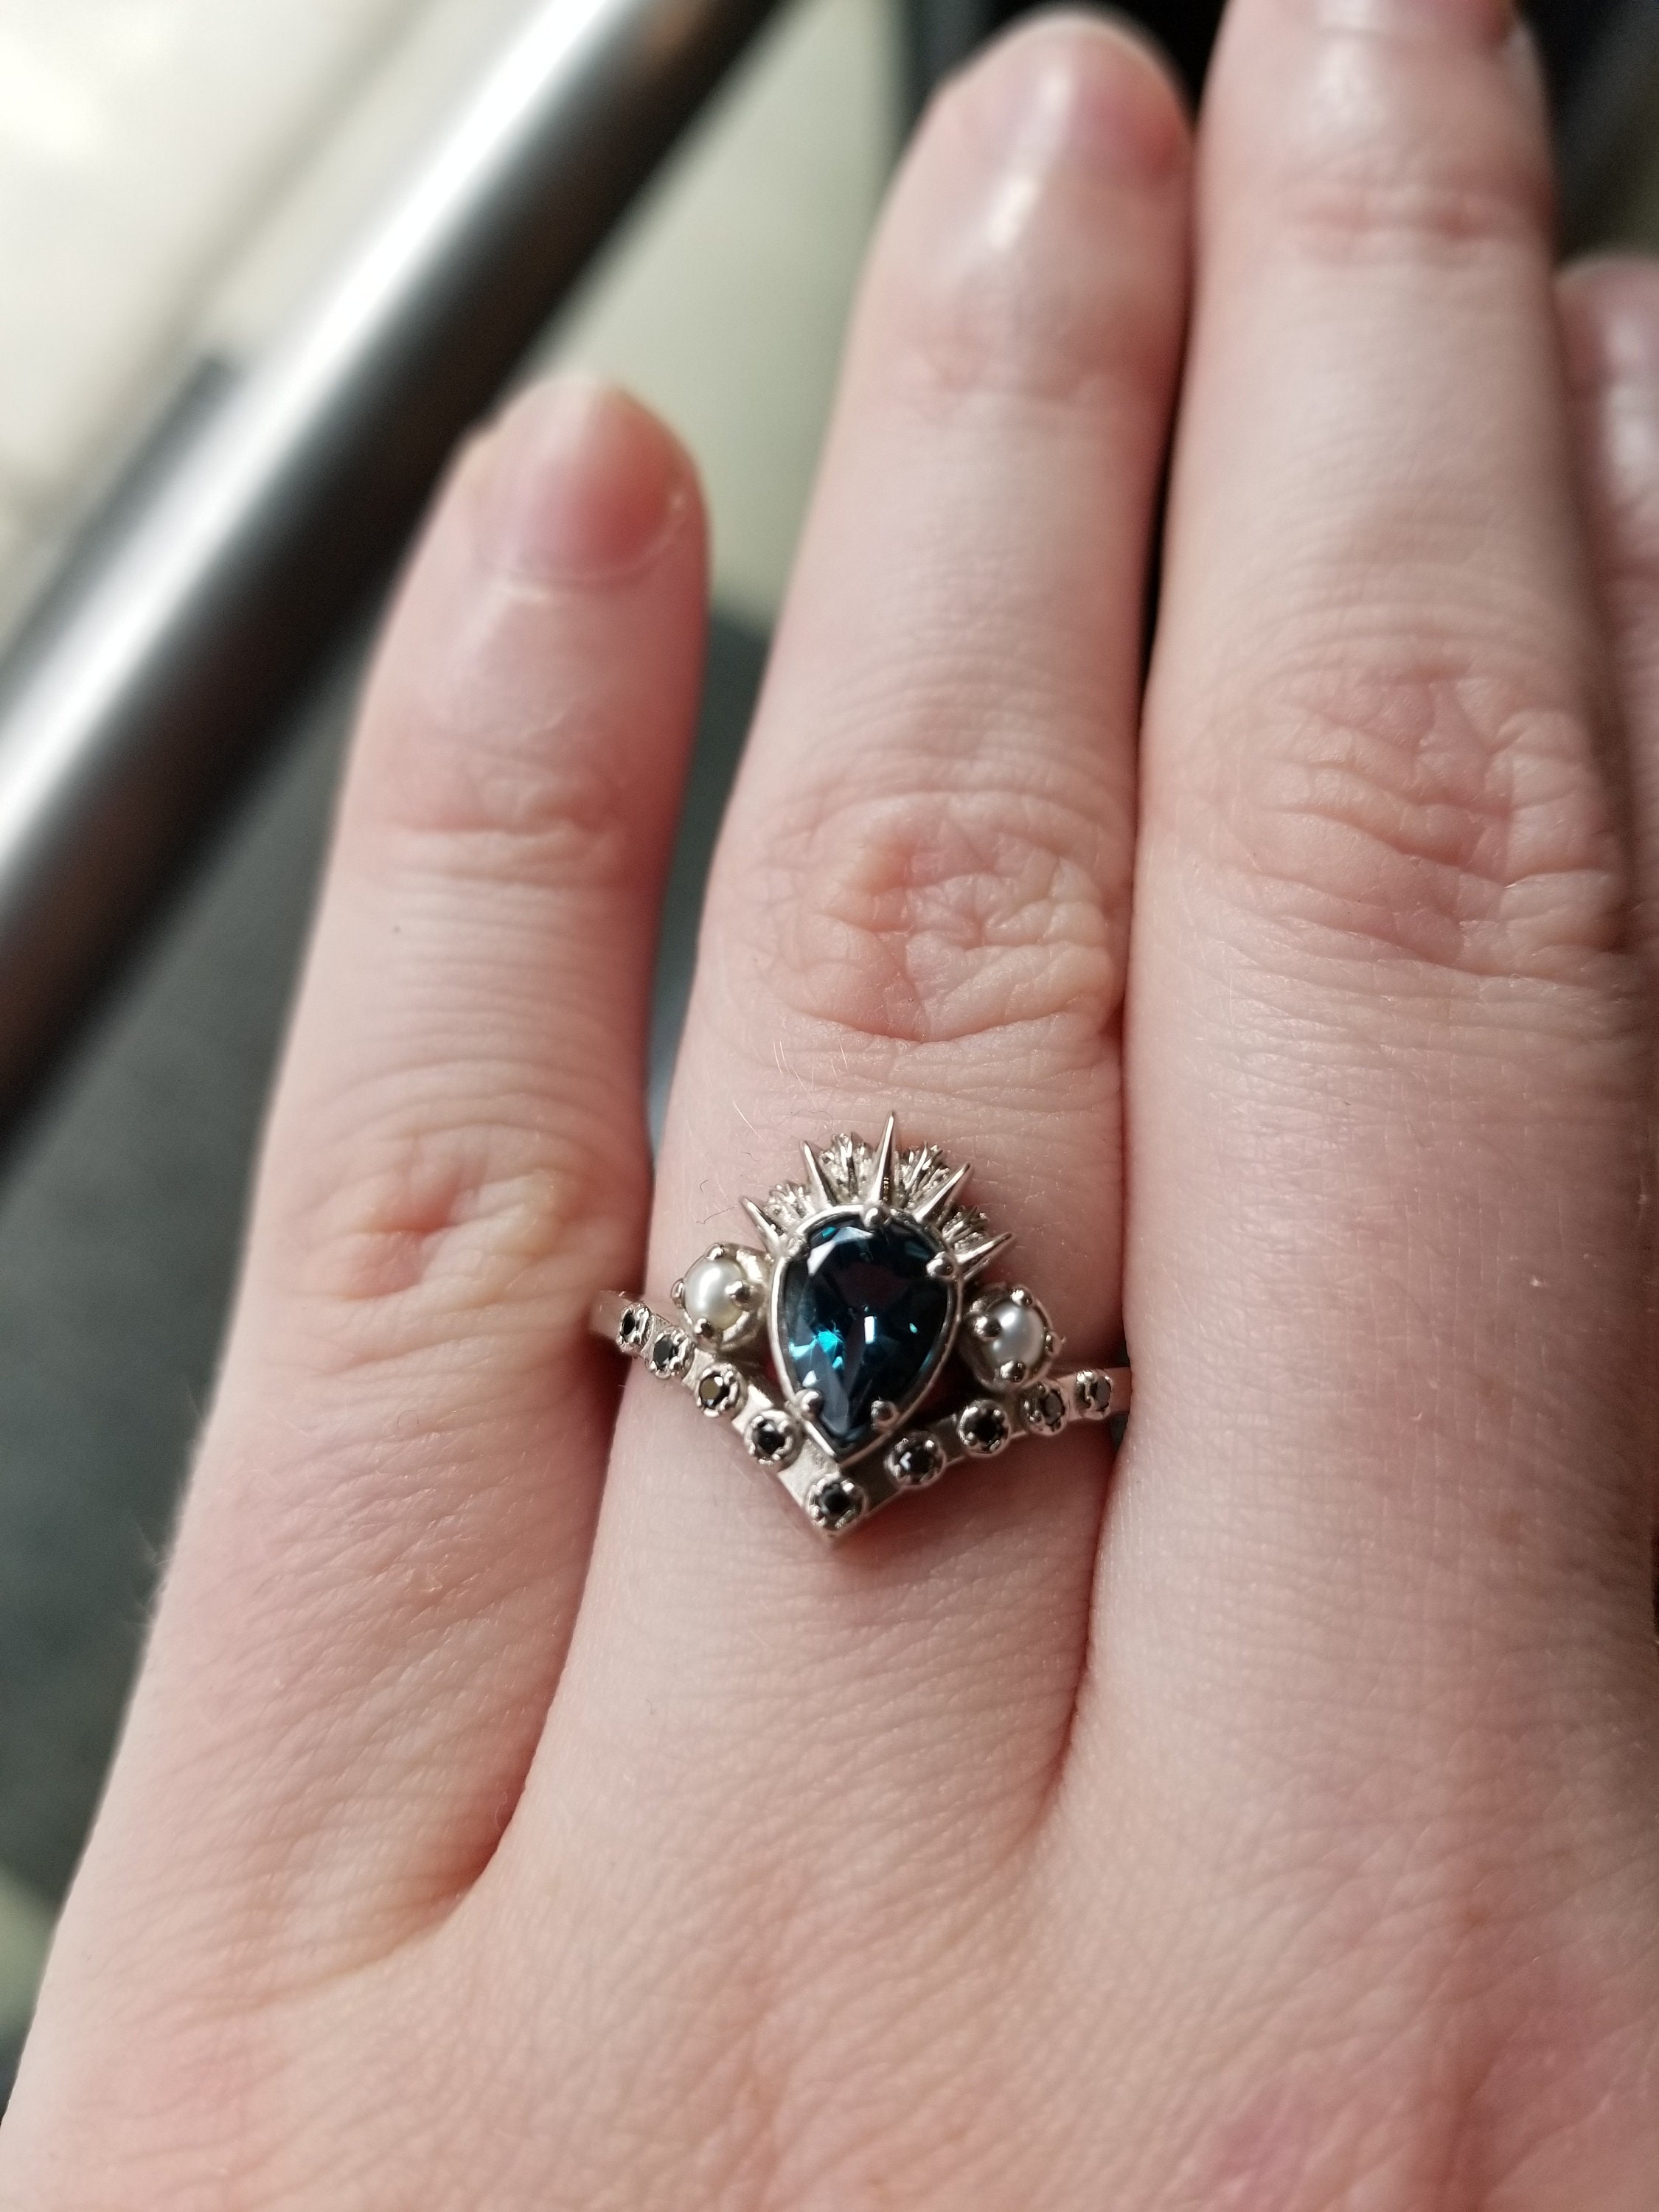 How to Upgrade My Engagement Ring with a Bigger Diamond?